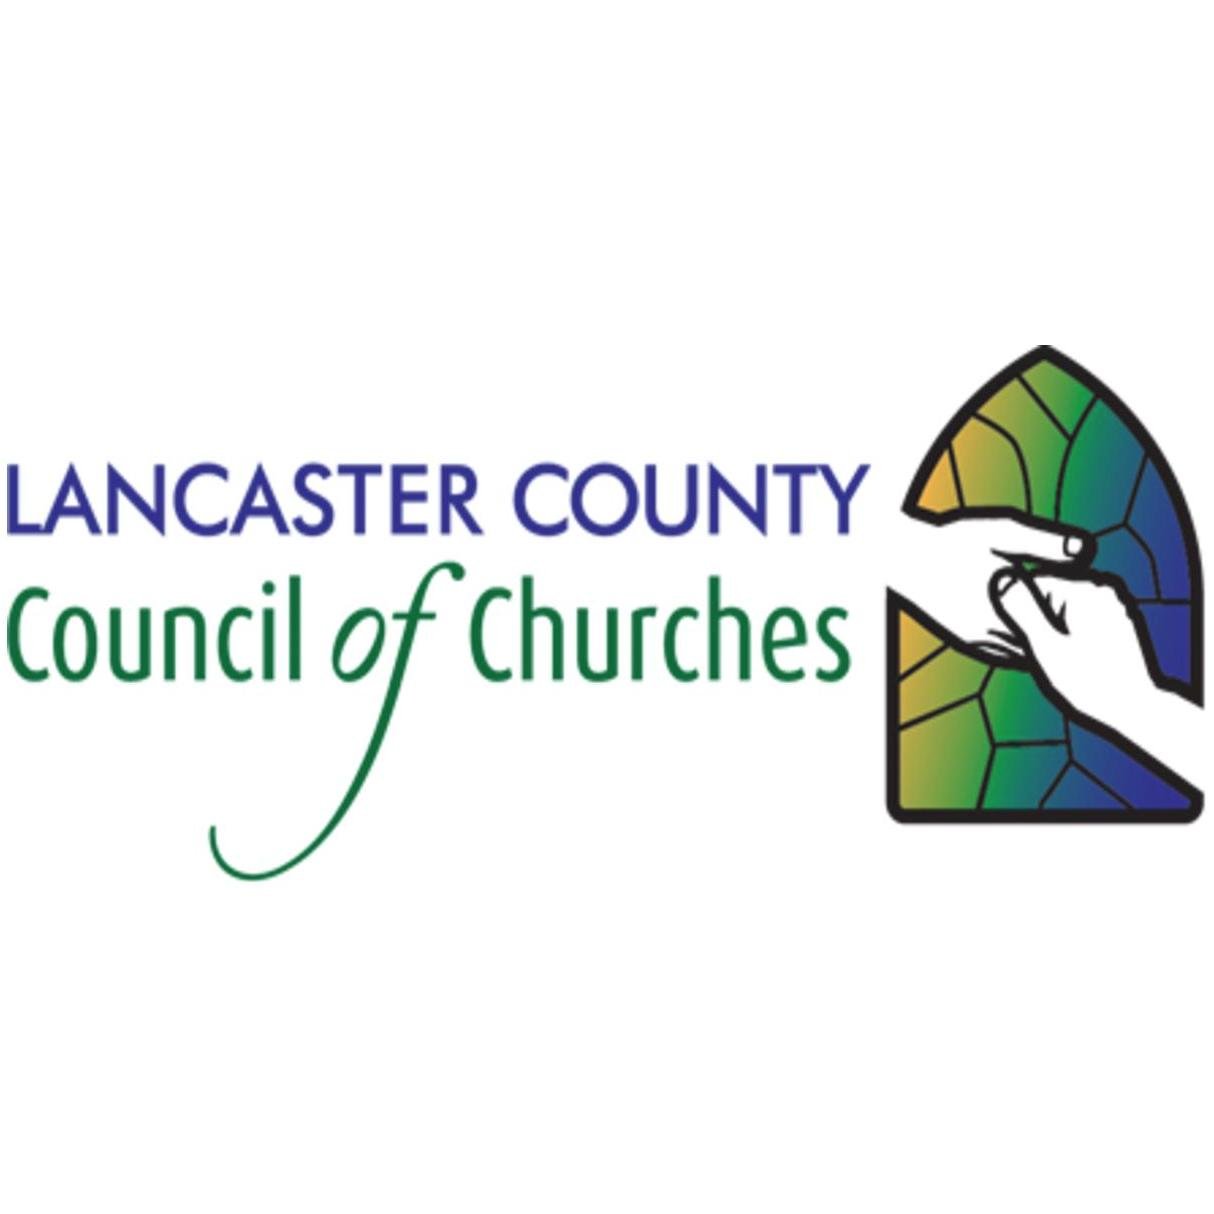 The Lancaster County Council of Churches feeds the hungry, clothes the naked, and lends its voice to benefit the marginalized of our culture.